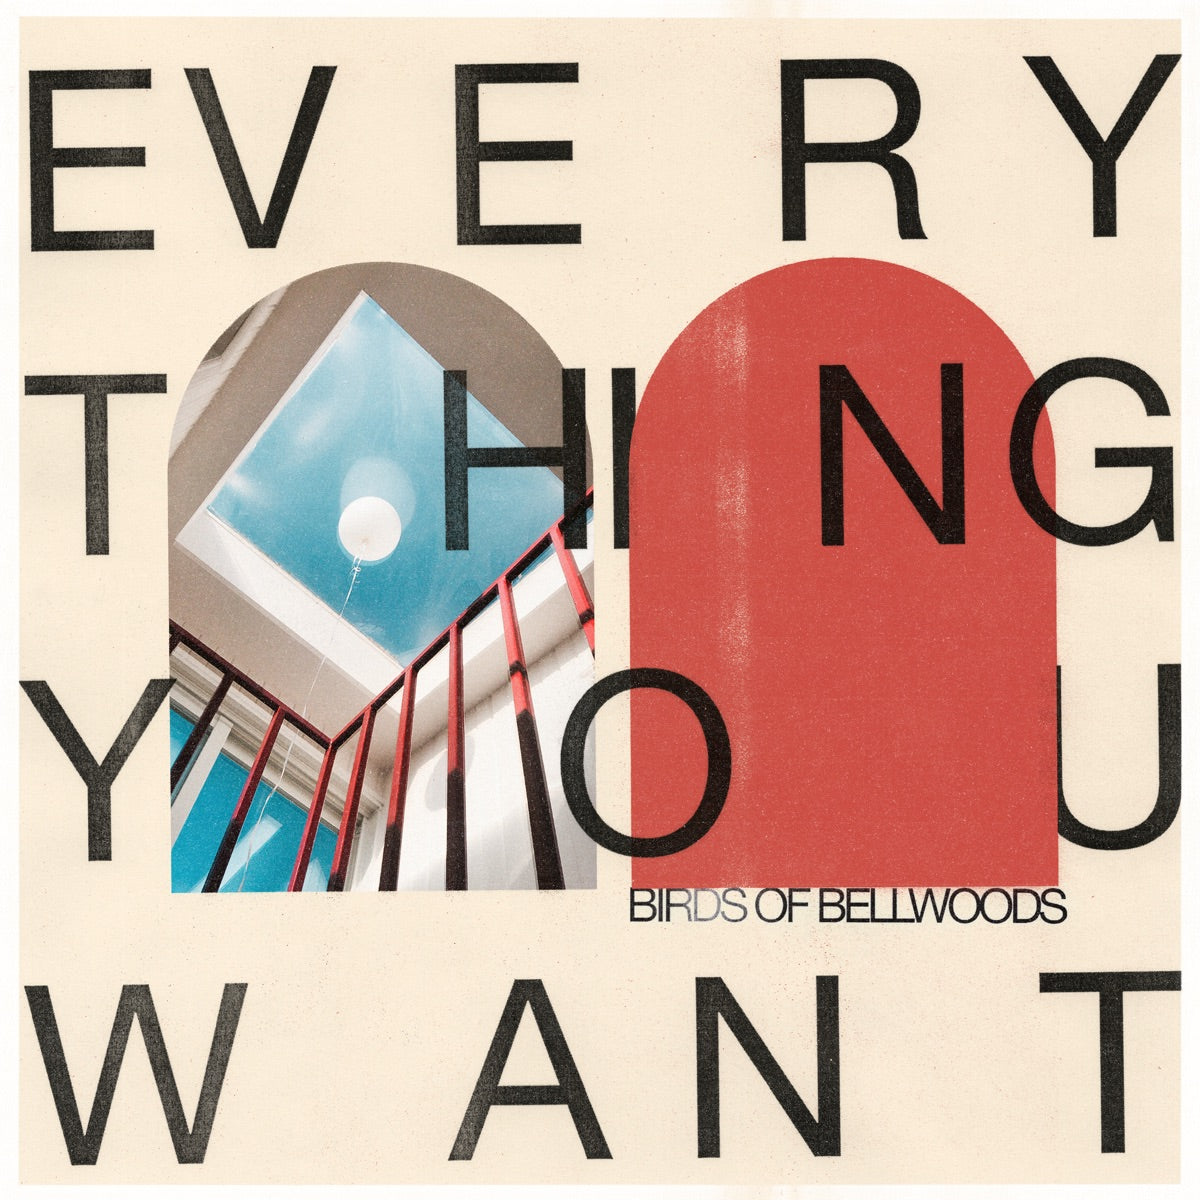 Birds of Bellwoods - Everything You Want (Vinyl LP)